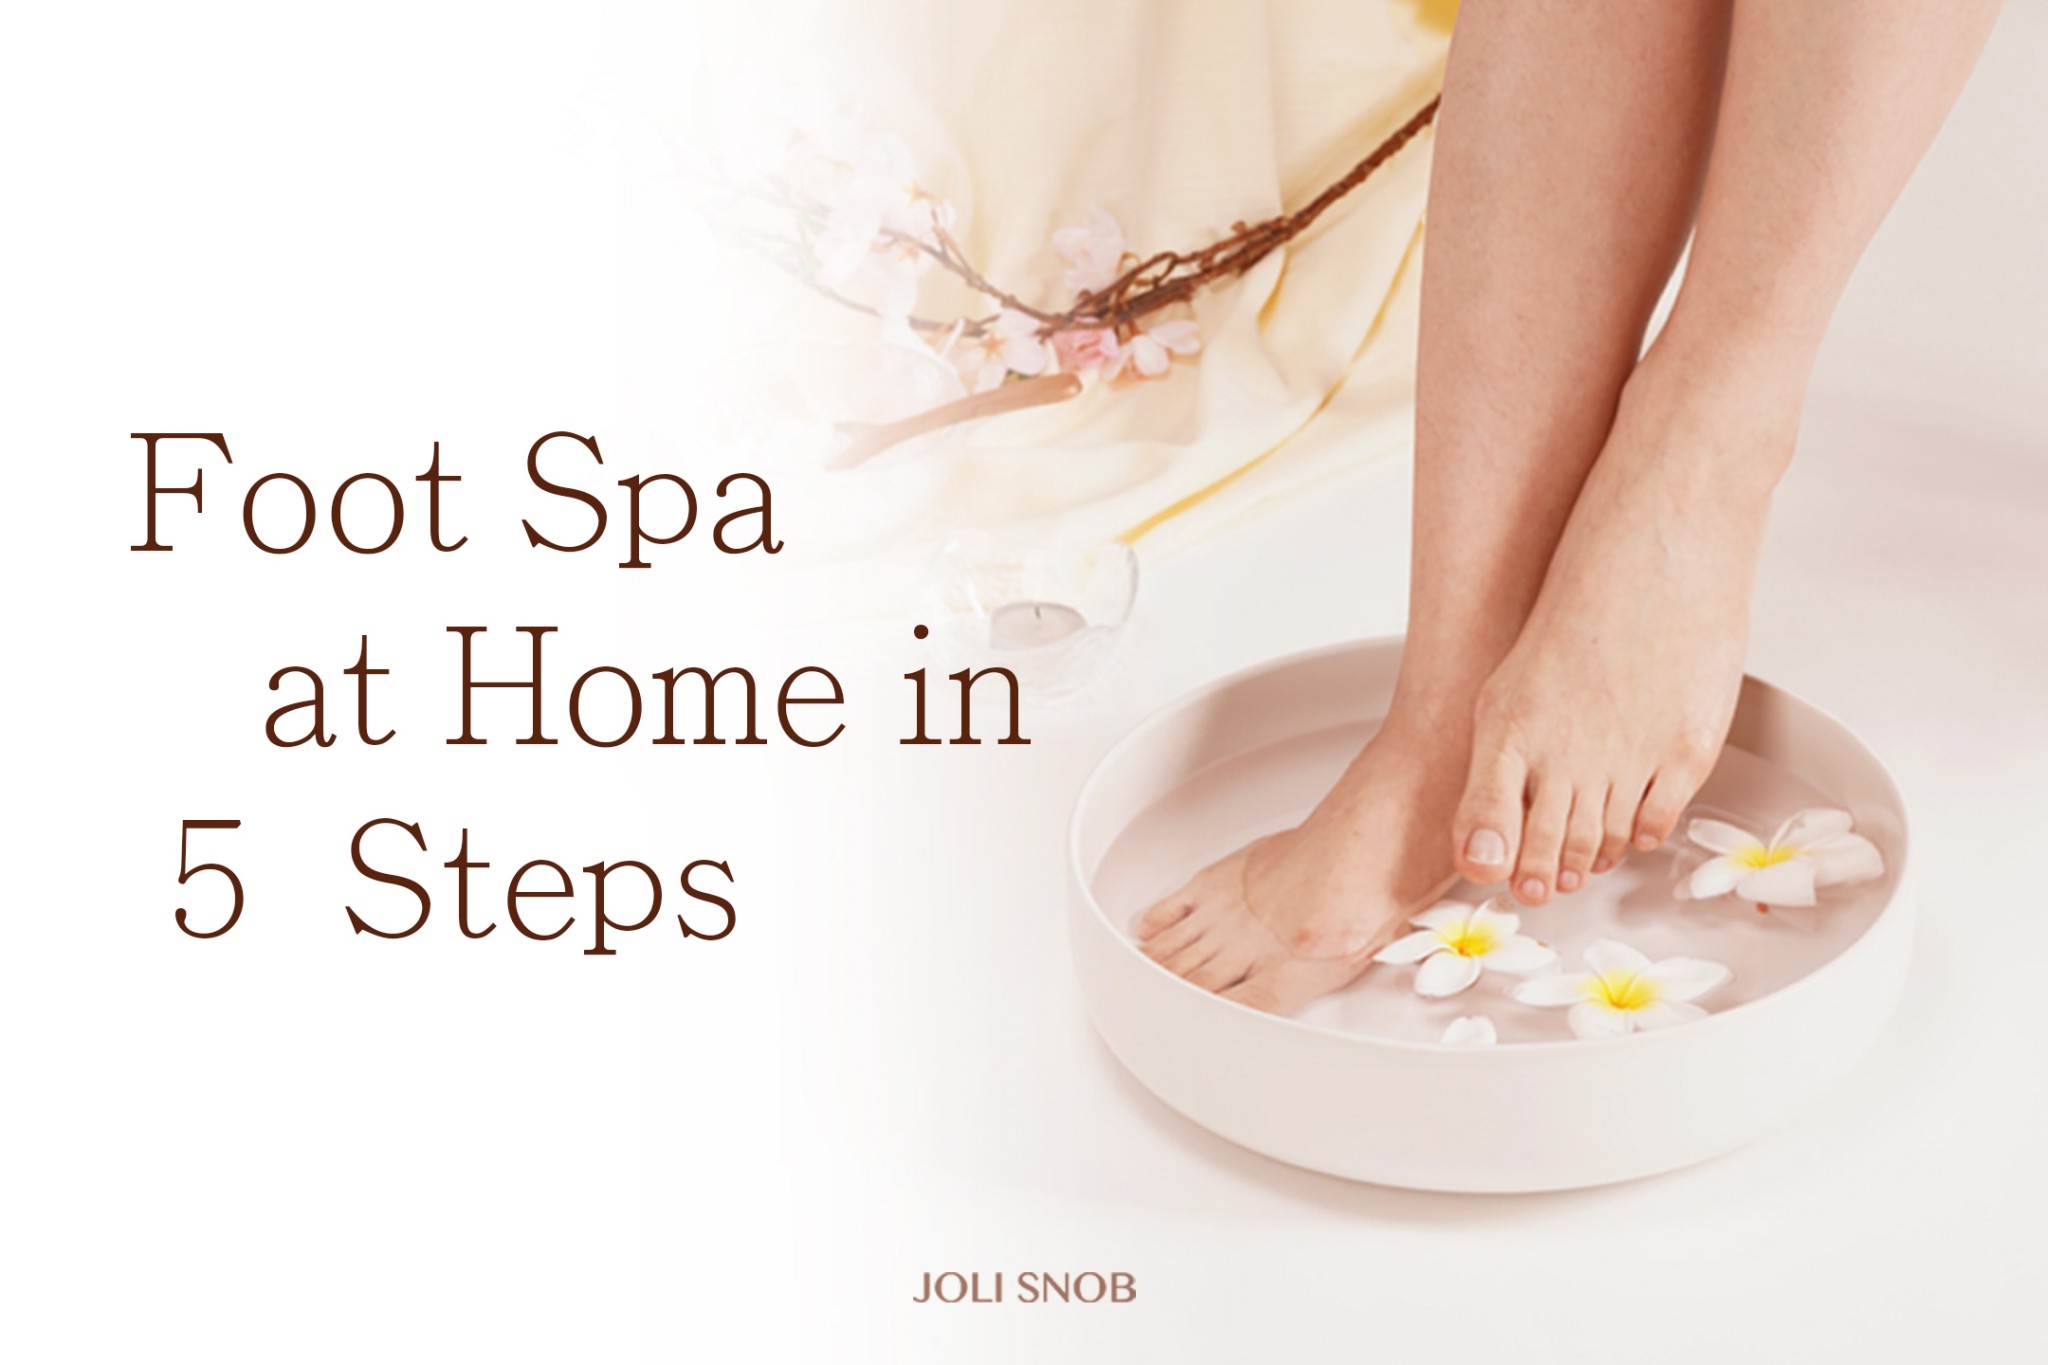 5 Steps Easy Foot Spa at Home